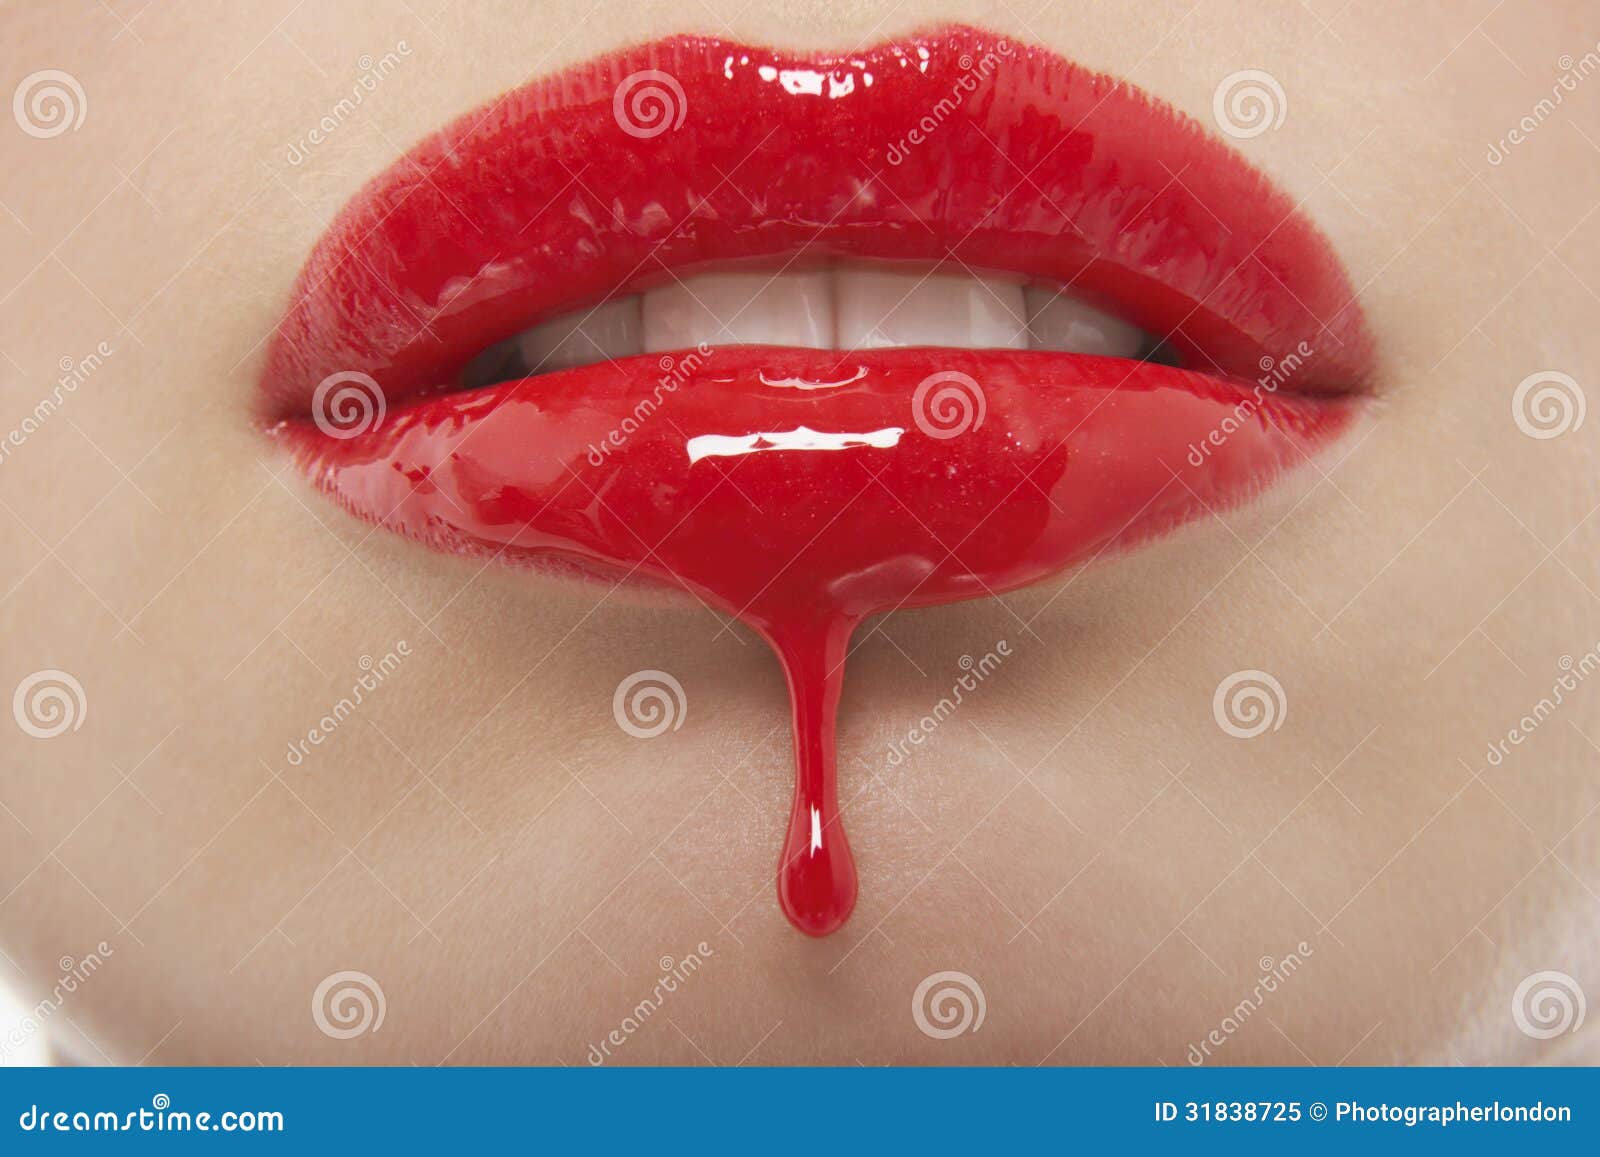 red lipgloss dripping from woman's lips